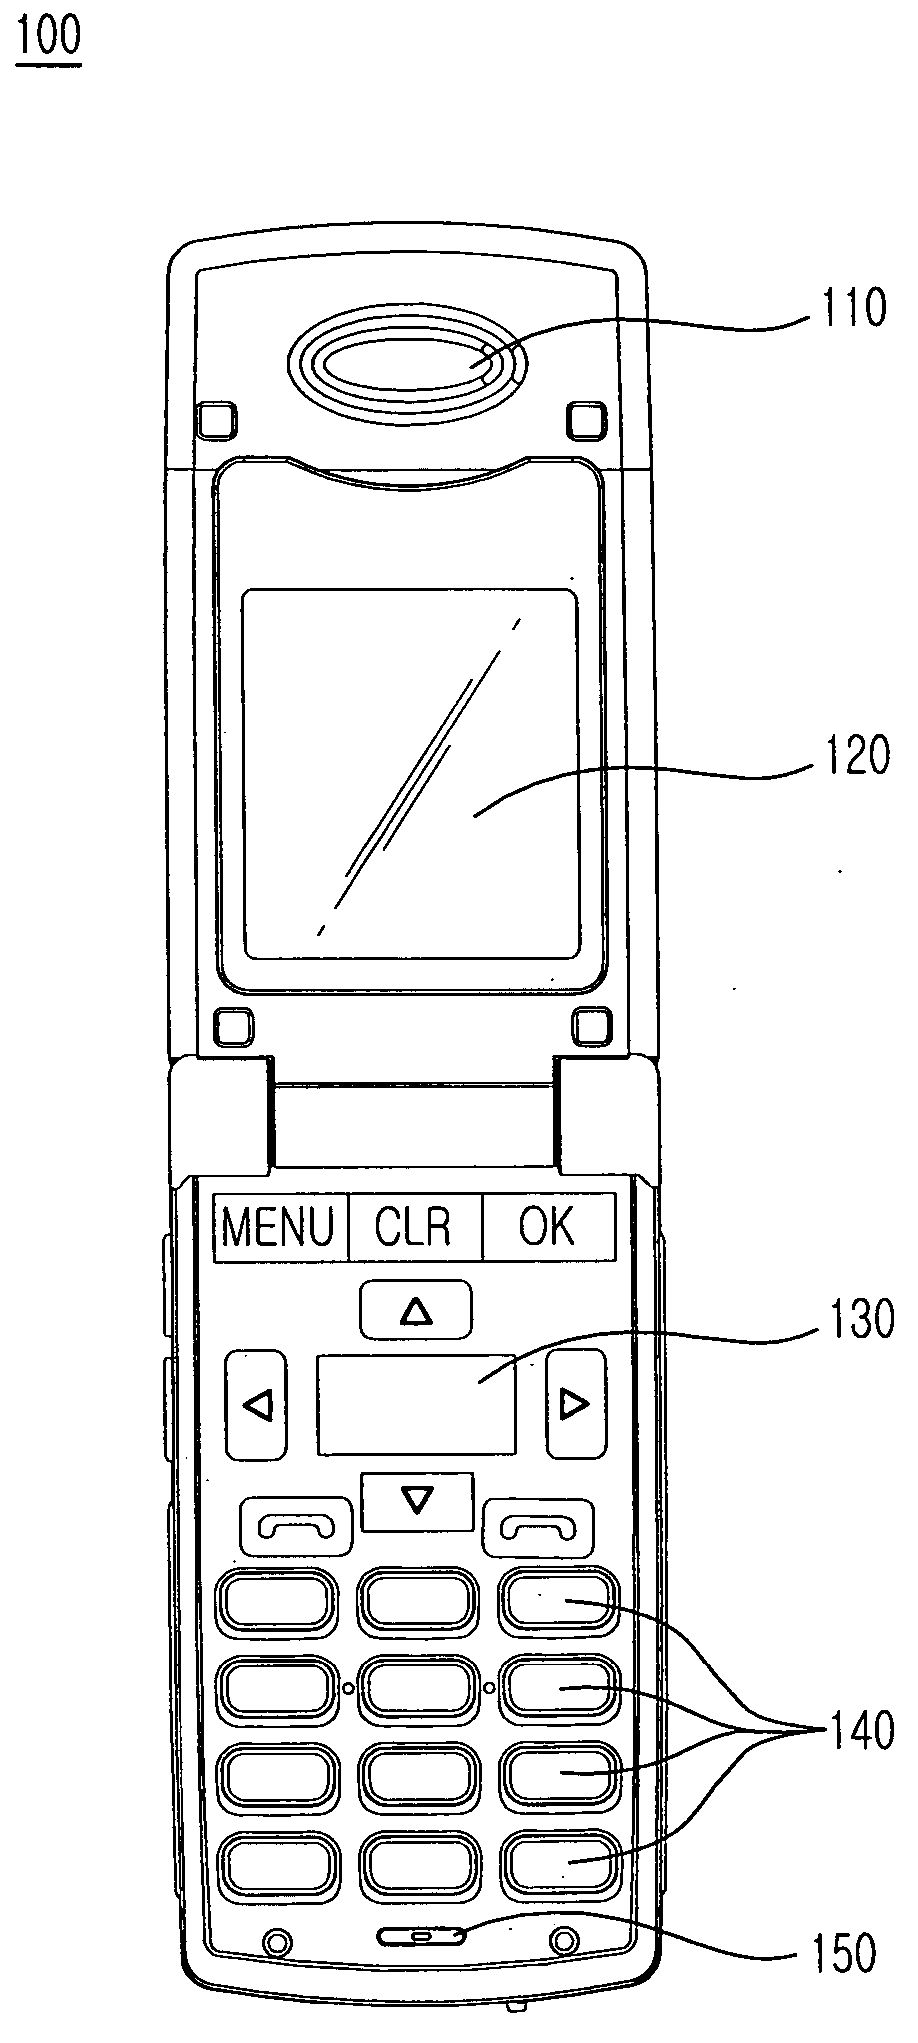 Method for setting shortcut key and performing function based on fingerprint recognition and wireless communication terminal using thereof